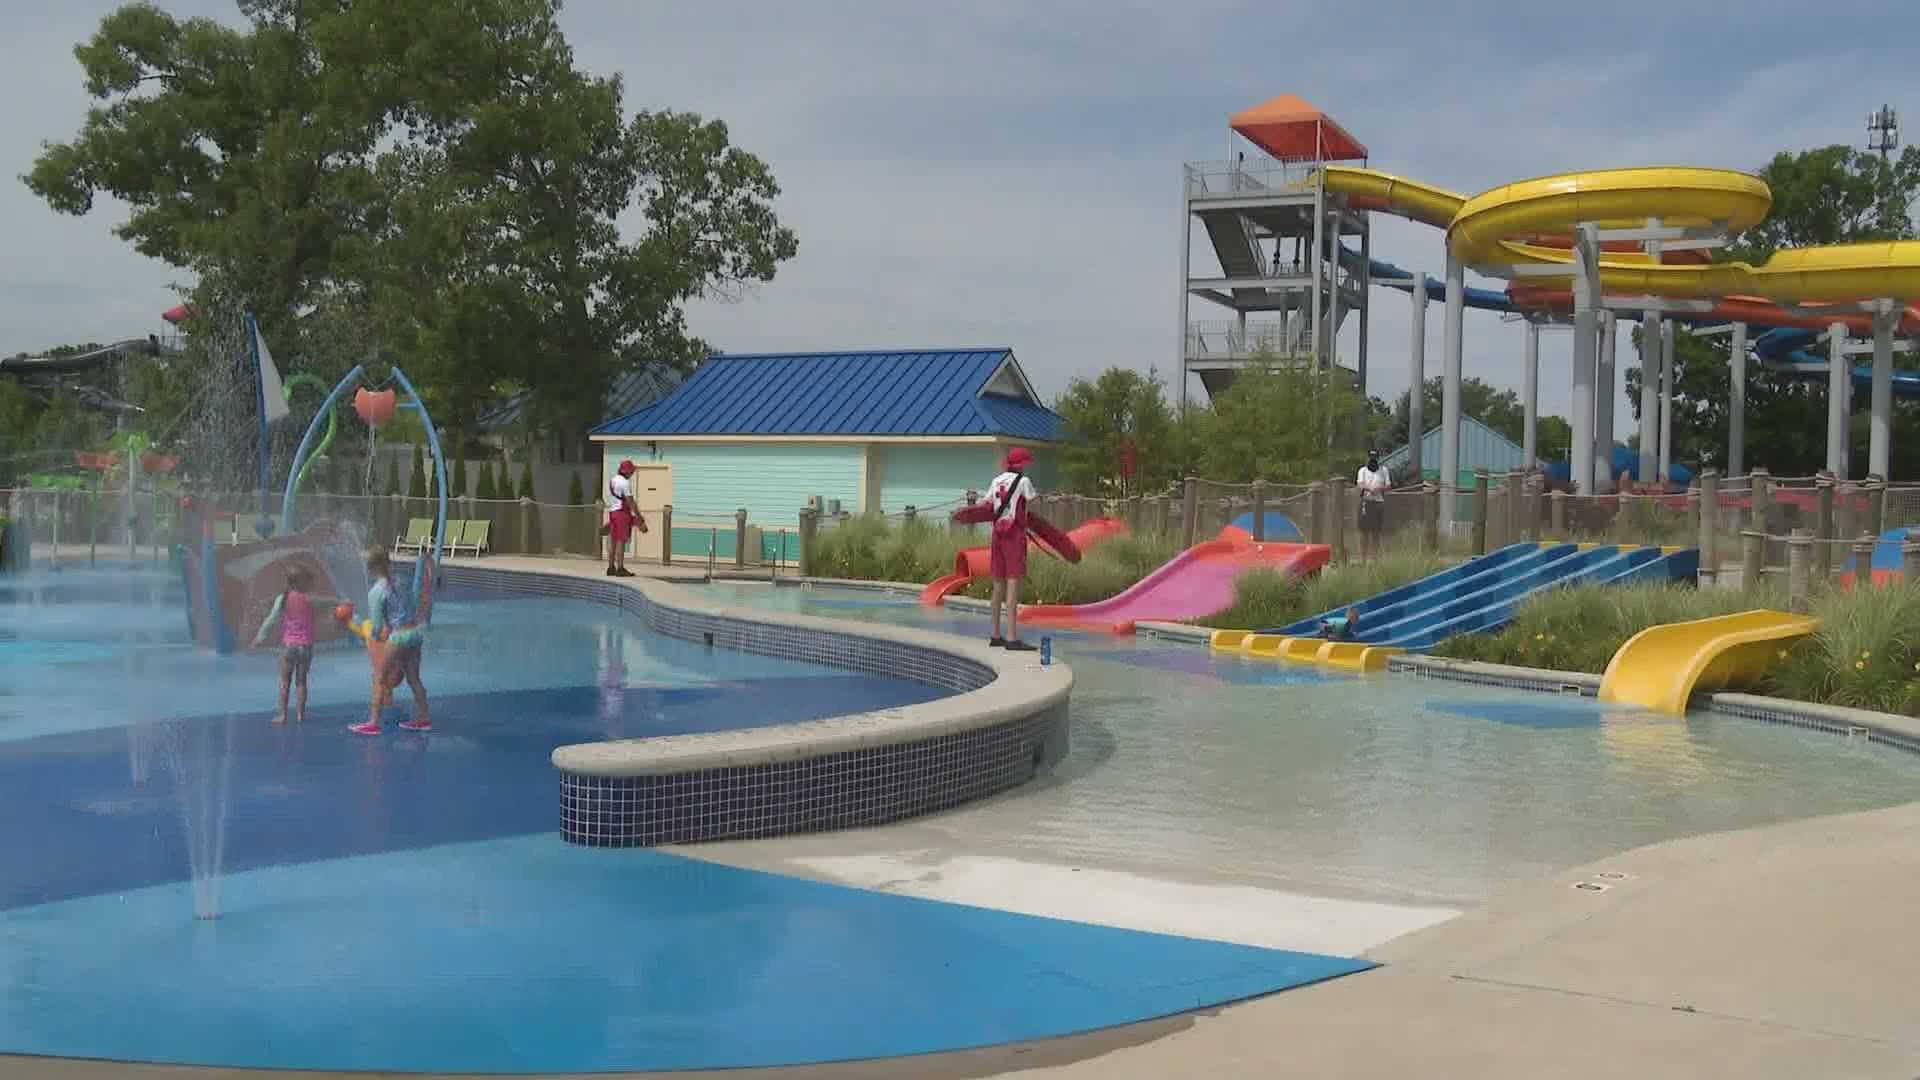 The water park opens to season passholders on July 16 and to the public on July 17.